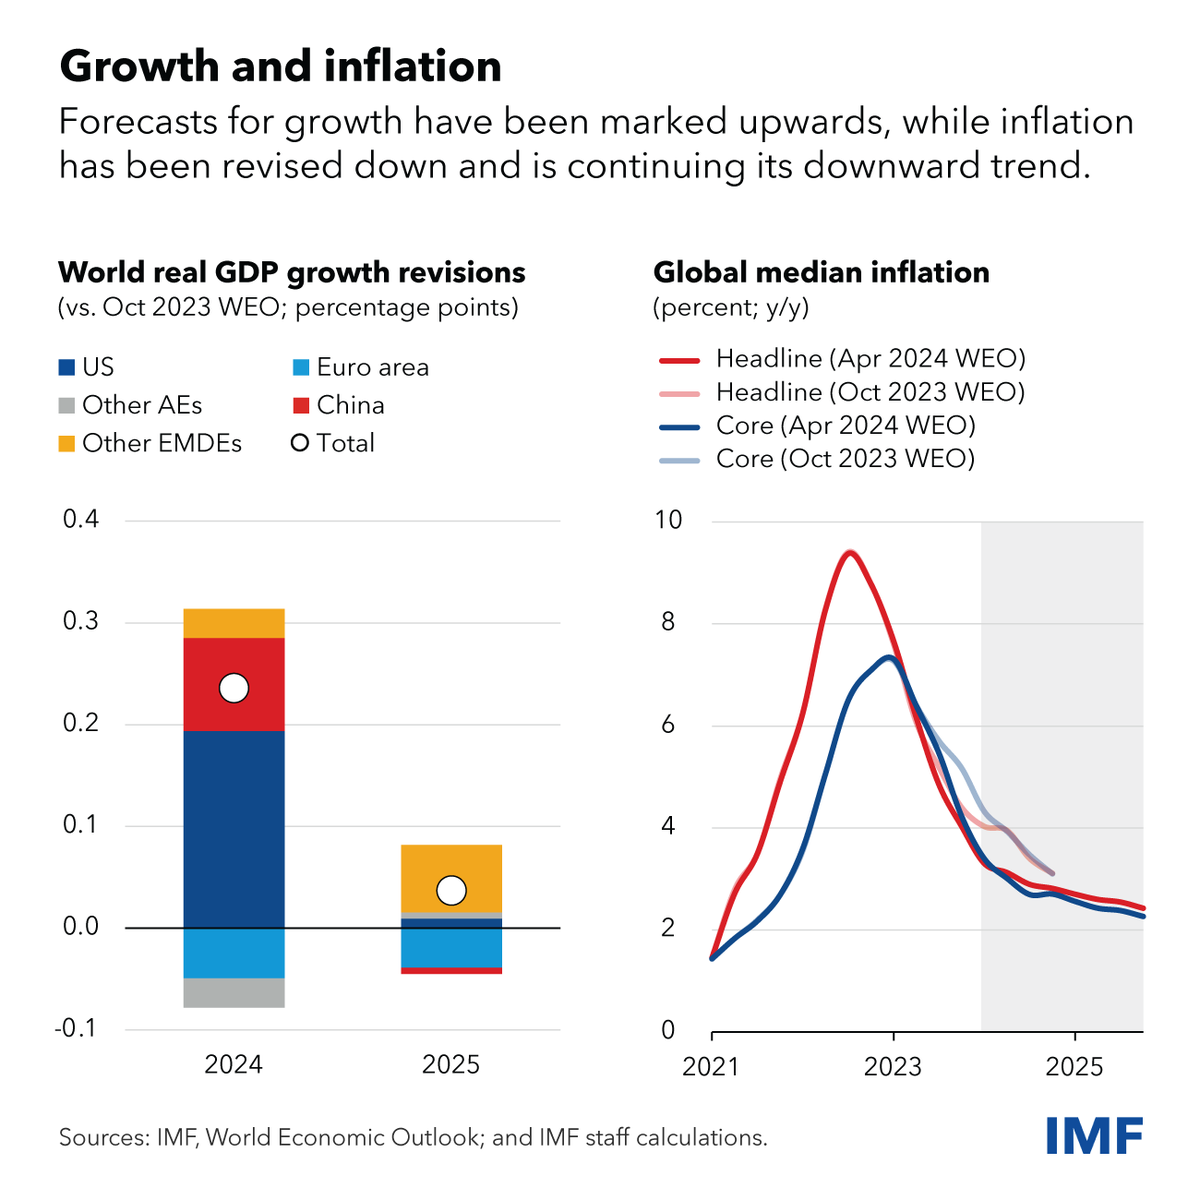 Global growth will be steady at around 3.2% this year and next as inflation continues to moderate, according to the latest IMF World Economic Outlook. Most indicators continue to signal a soft landing. imf.org/en/Blogs/Artic…